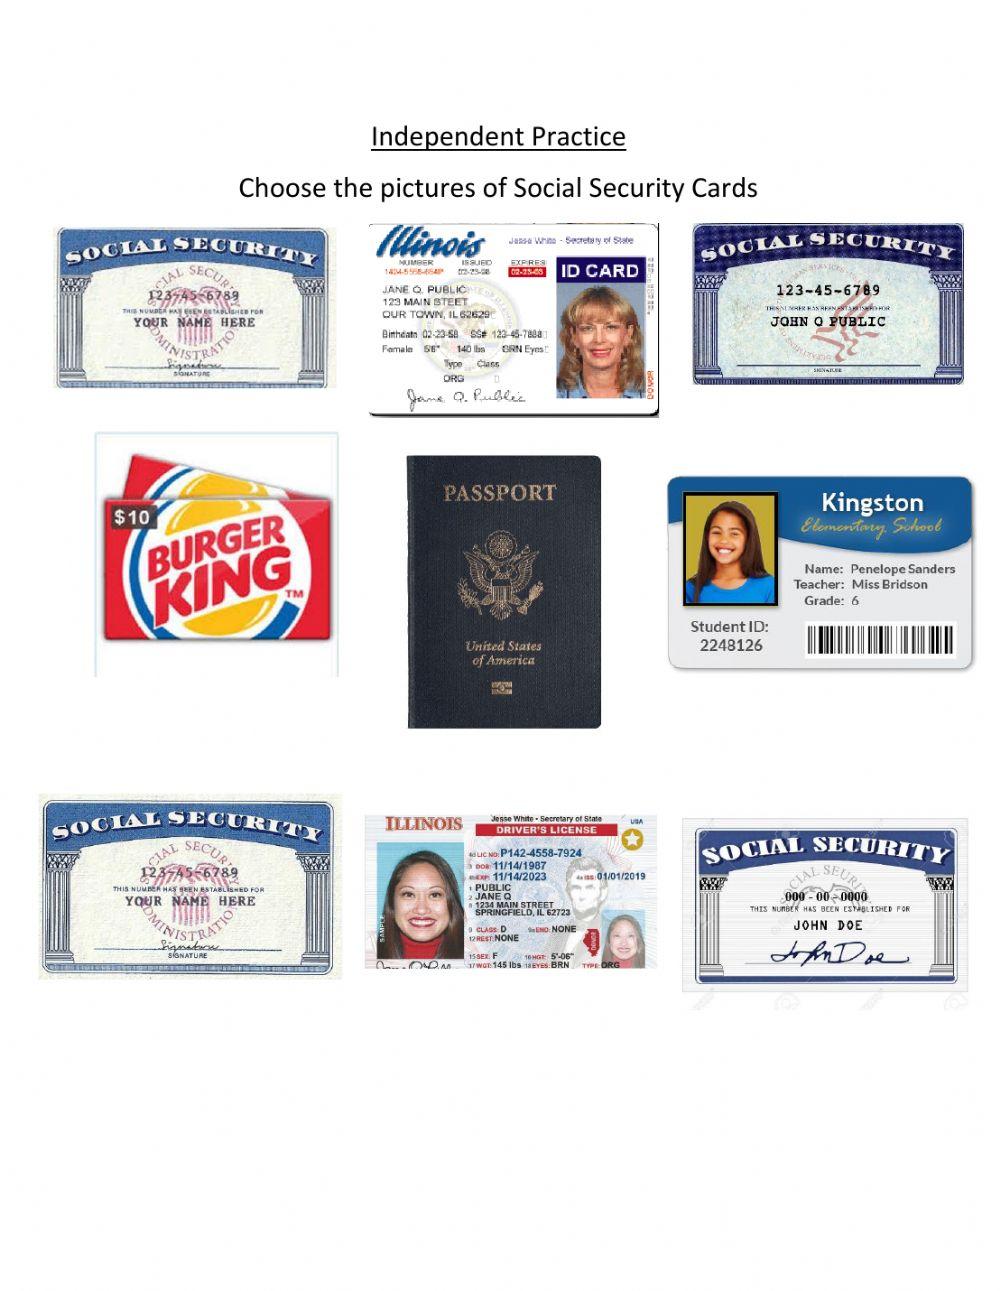 Independent Practice: Social Security Cards